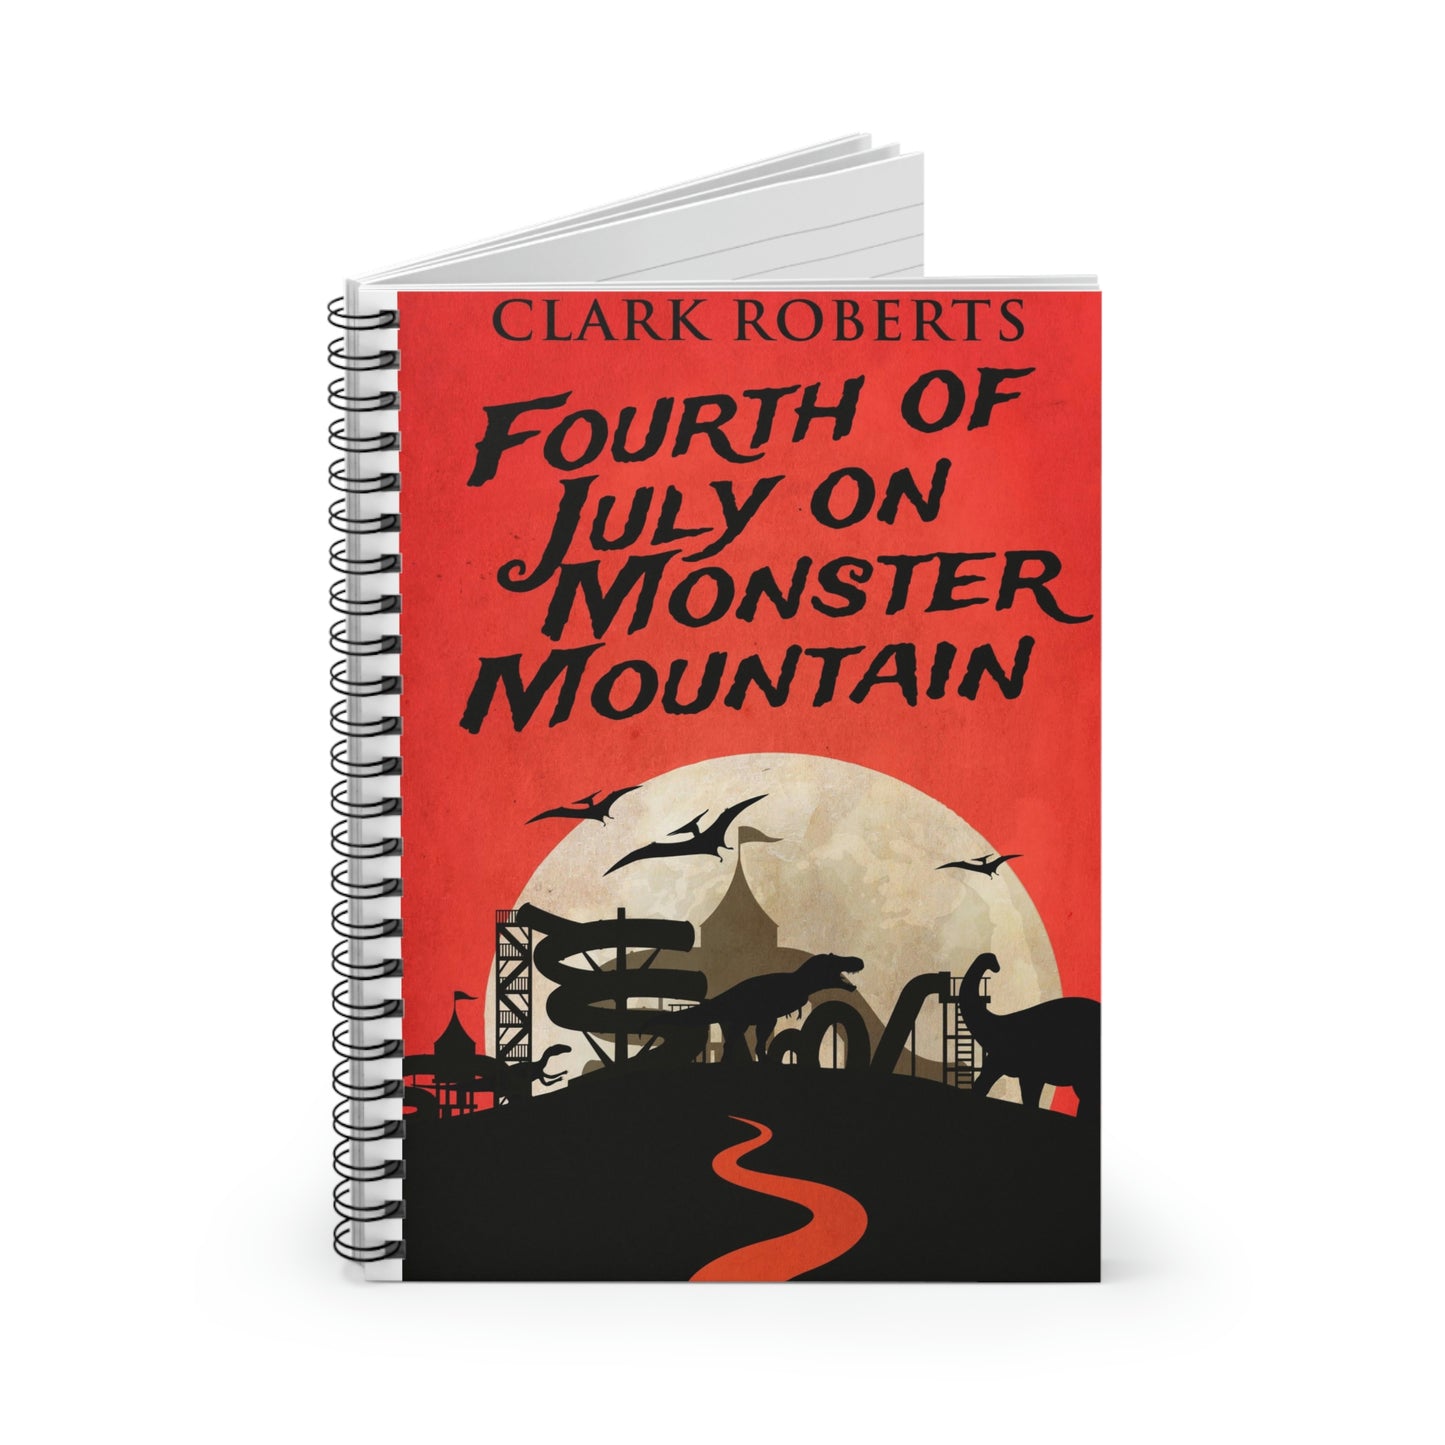 Fourth of July on Monster Mountain - Spiral Notebook